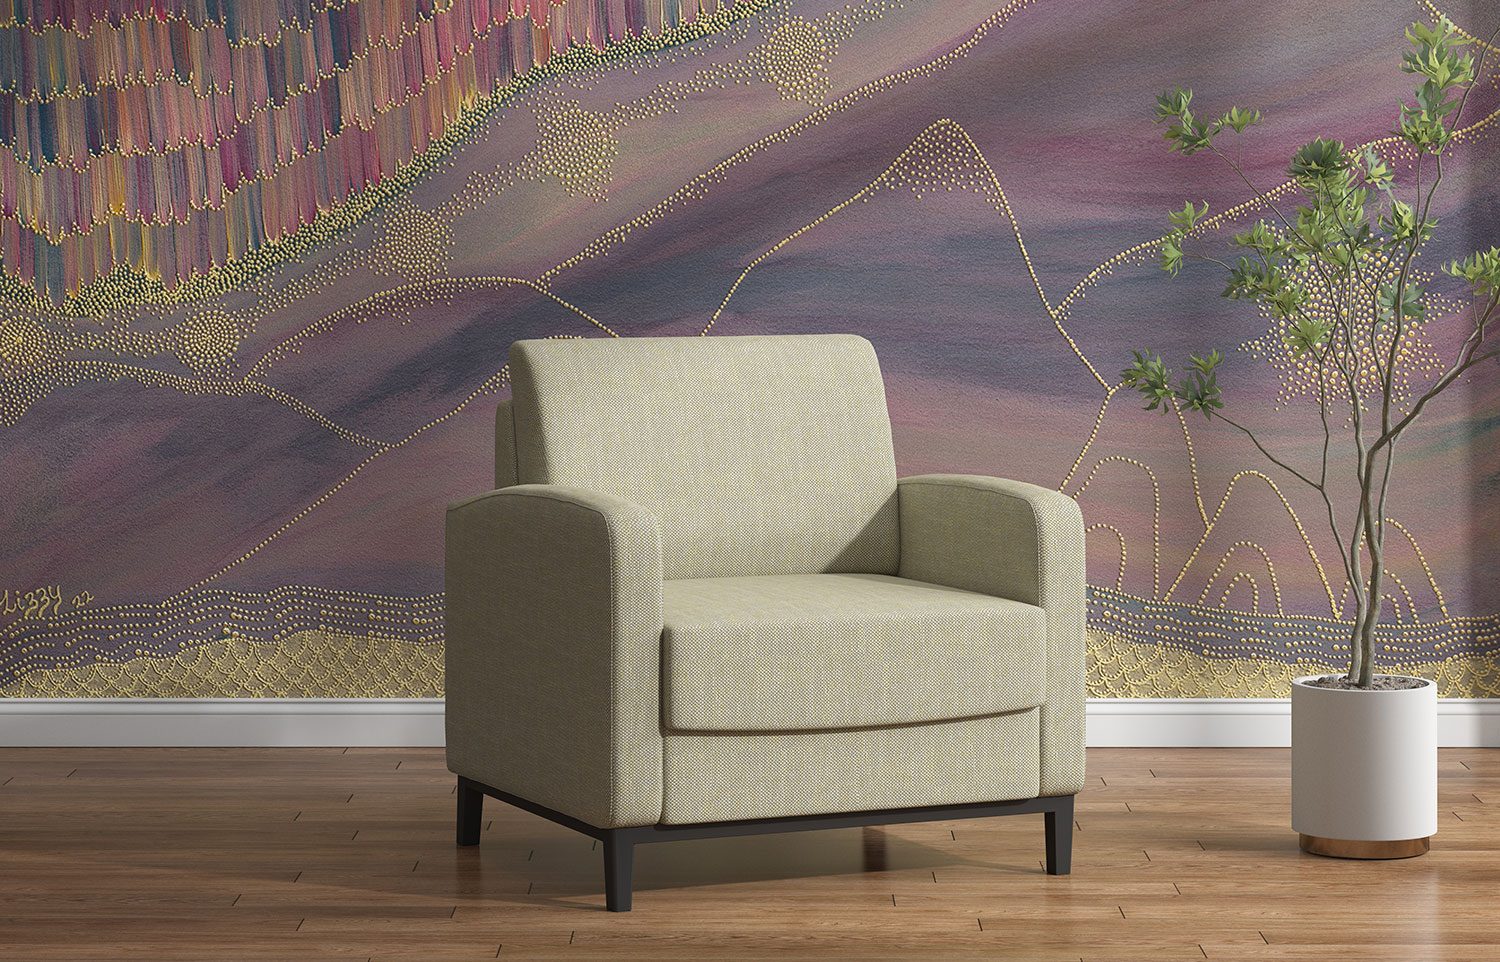 Armchair with indigenous wall mural in aged care facility